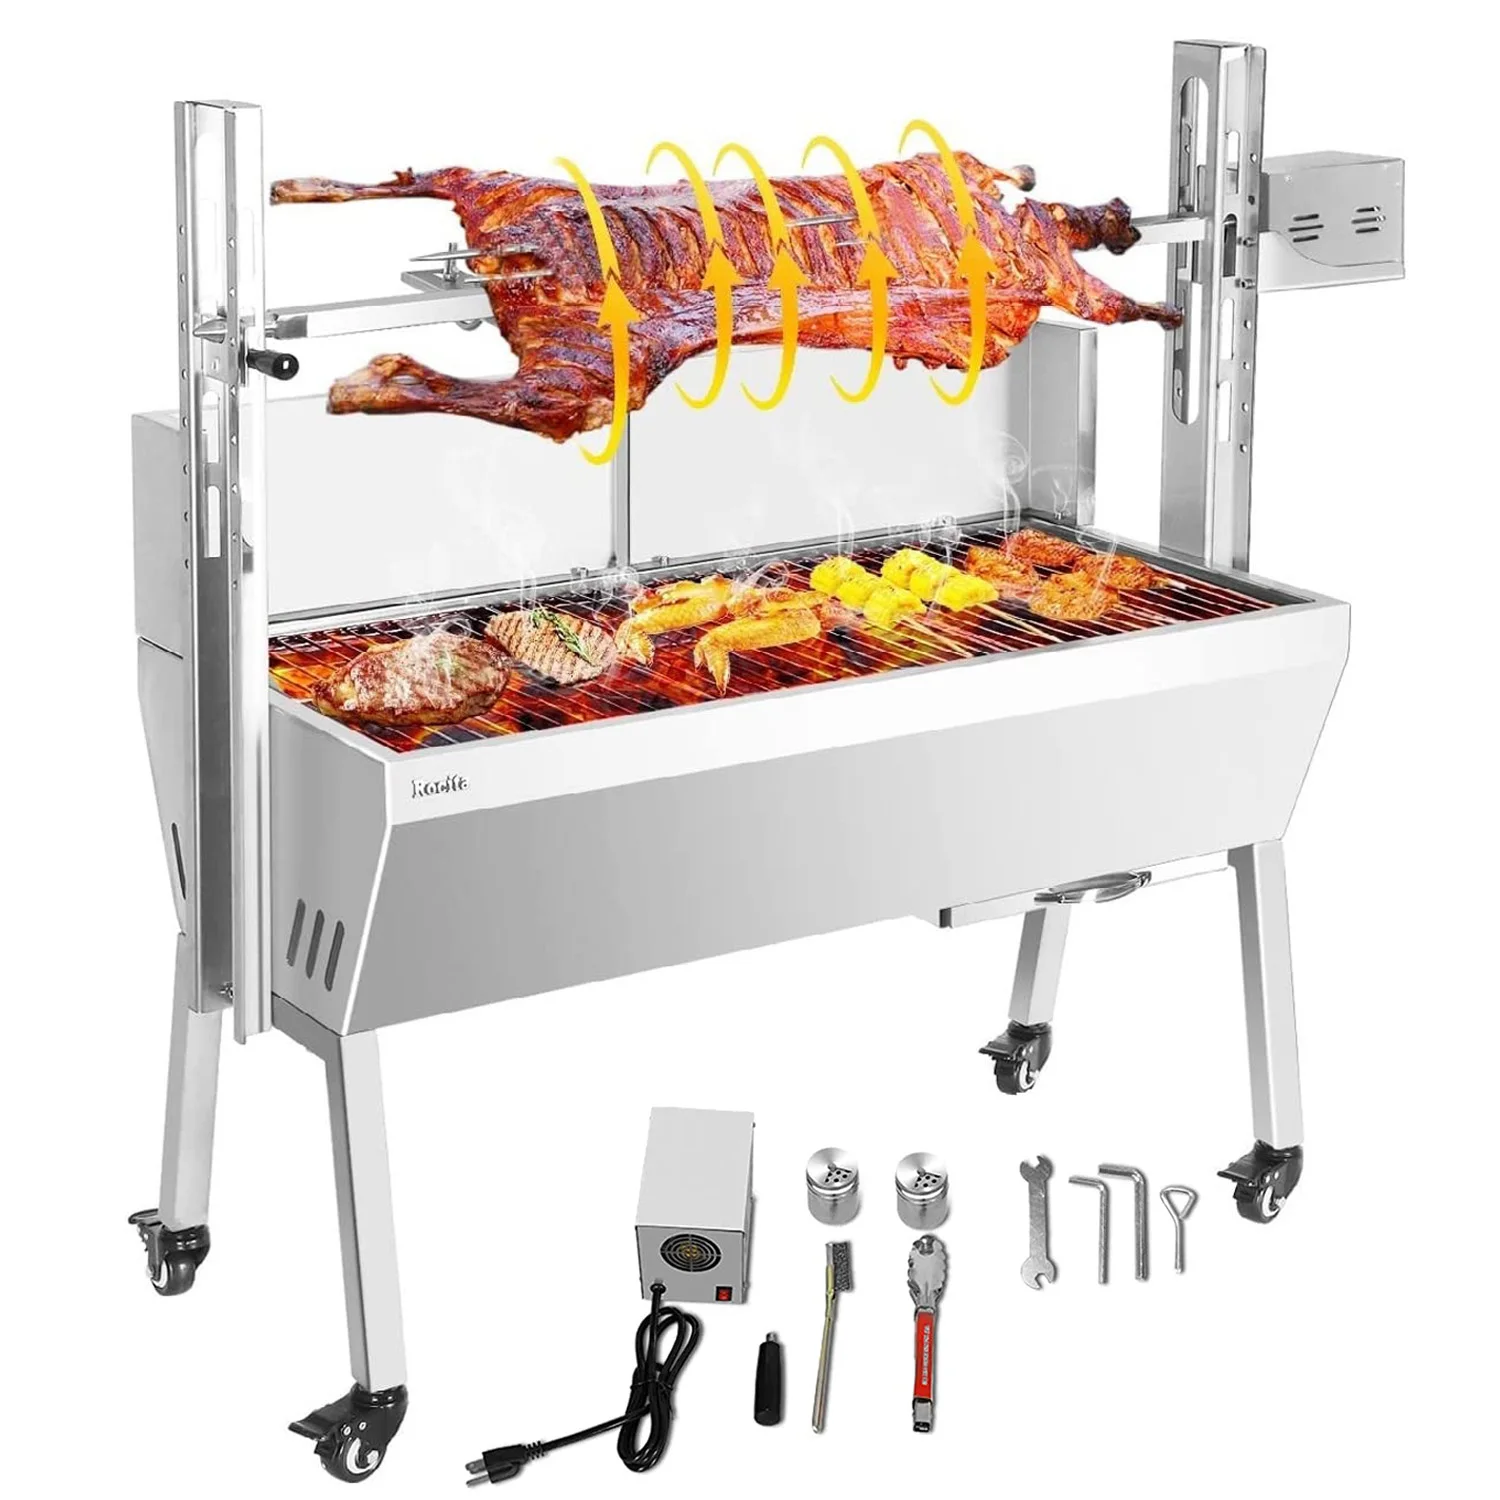 

132LB Stainless Steel Rotisserie Grill with Back Cover Guard 25W Motor Small Pig Lamb Rotisserie Roaster BBQ Charcoal Rotisserie